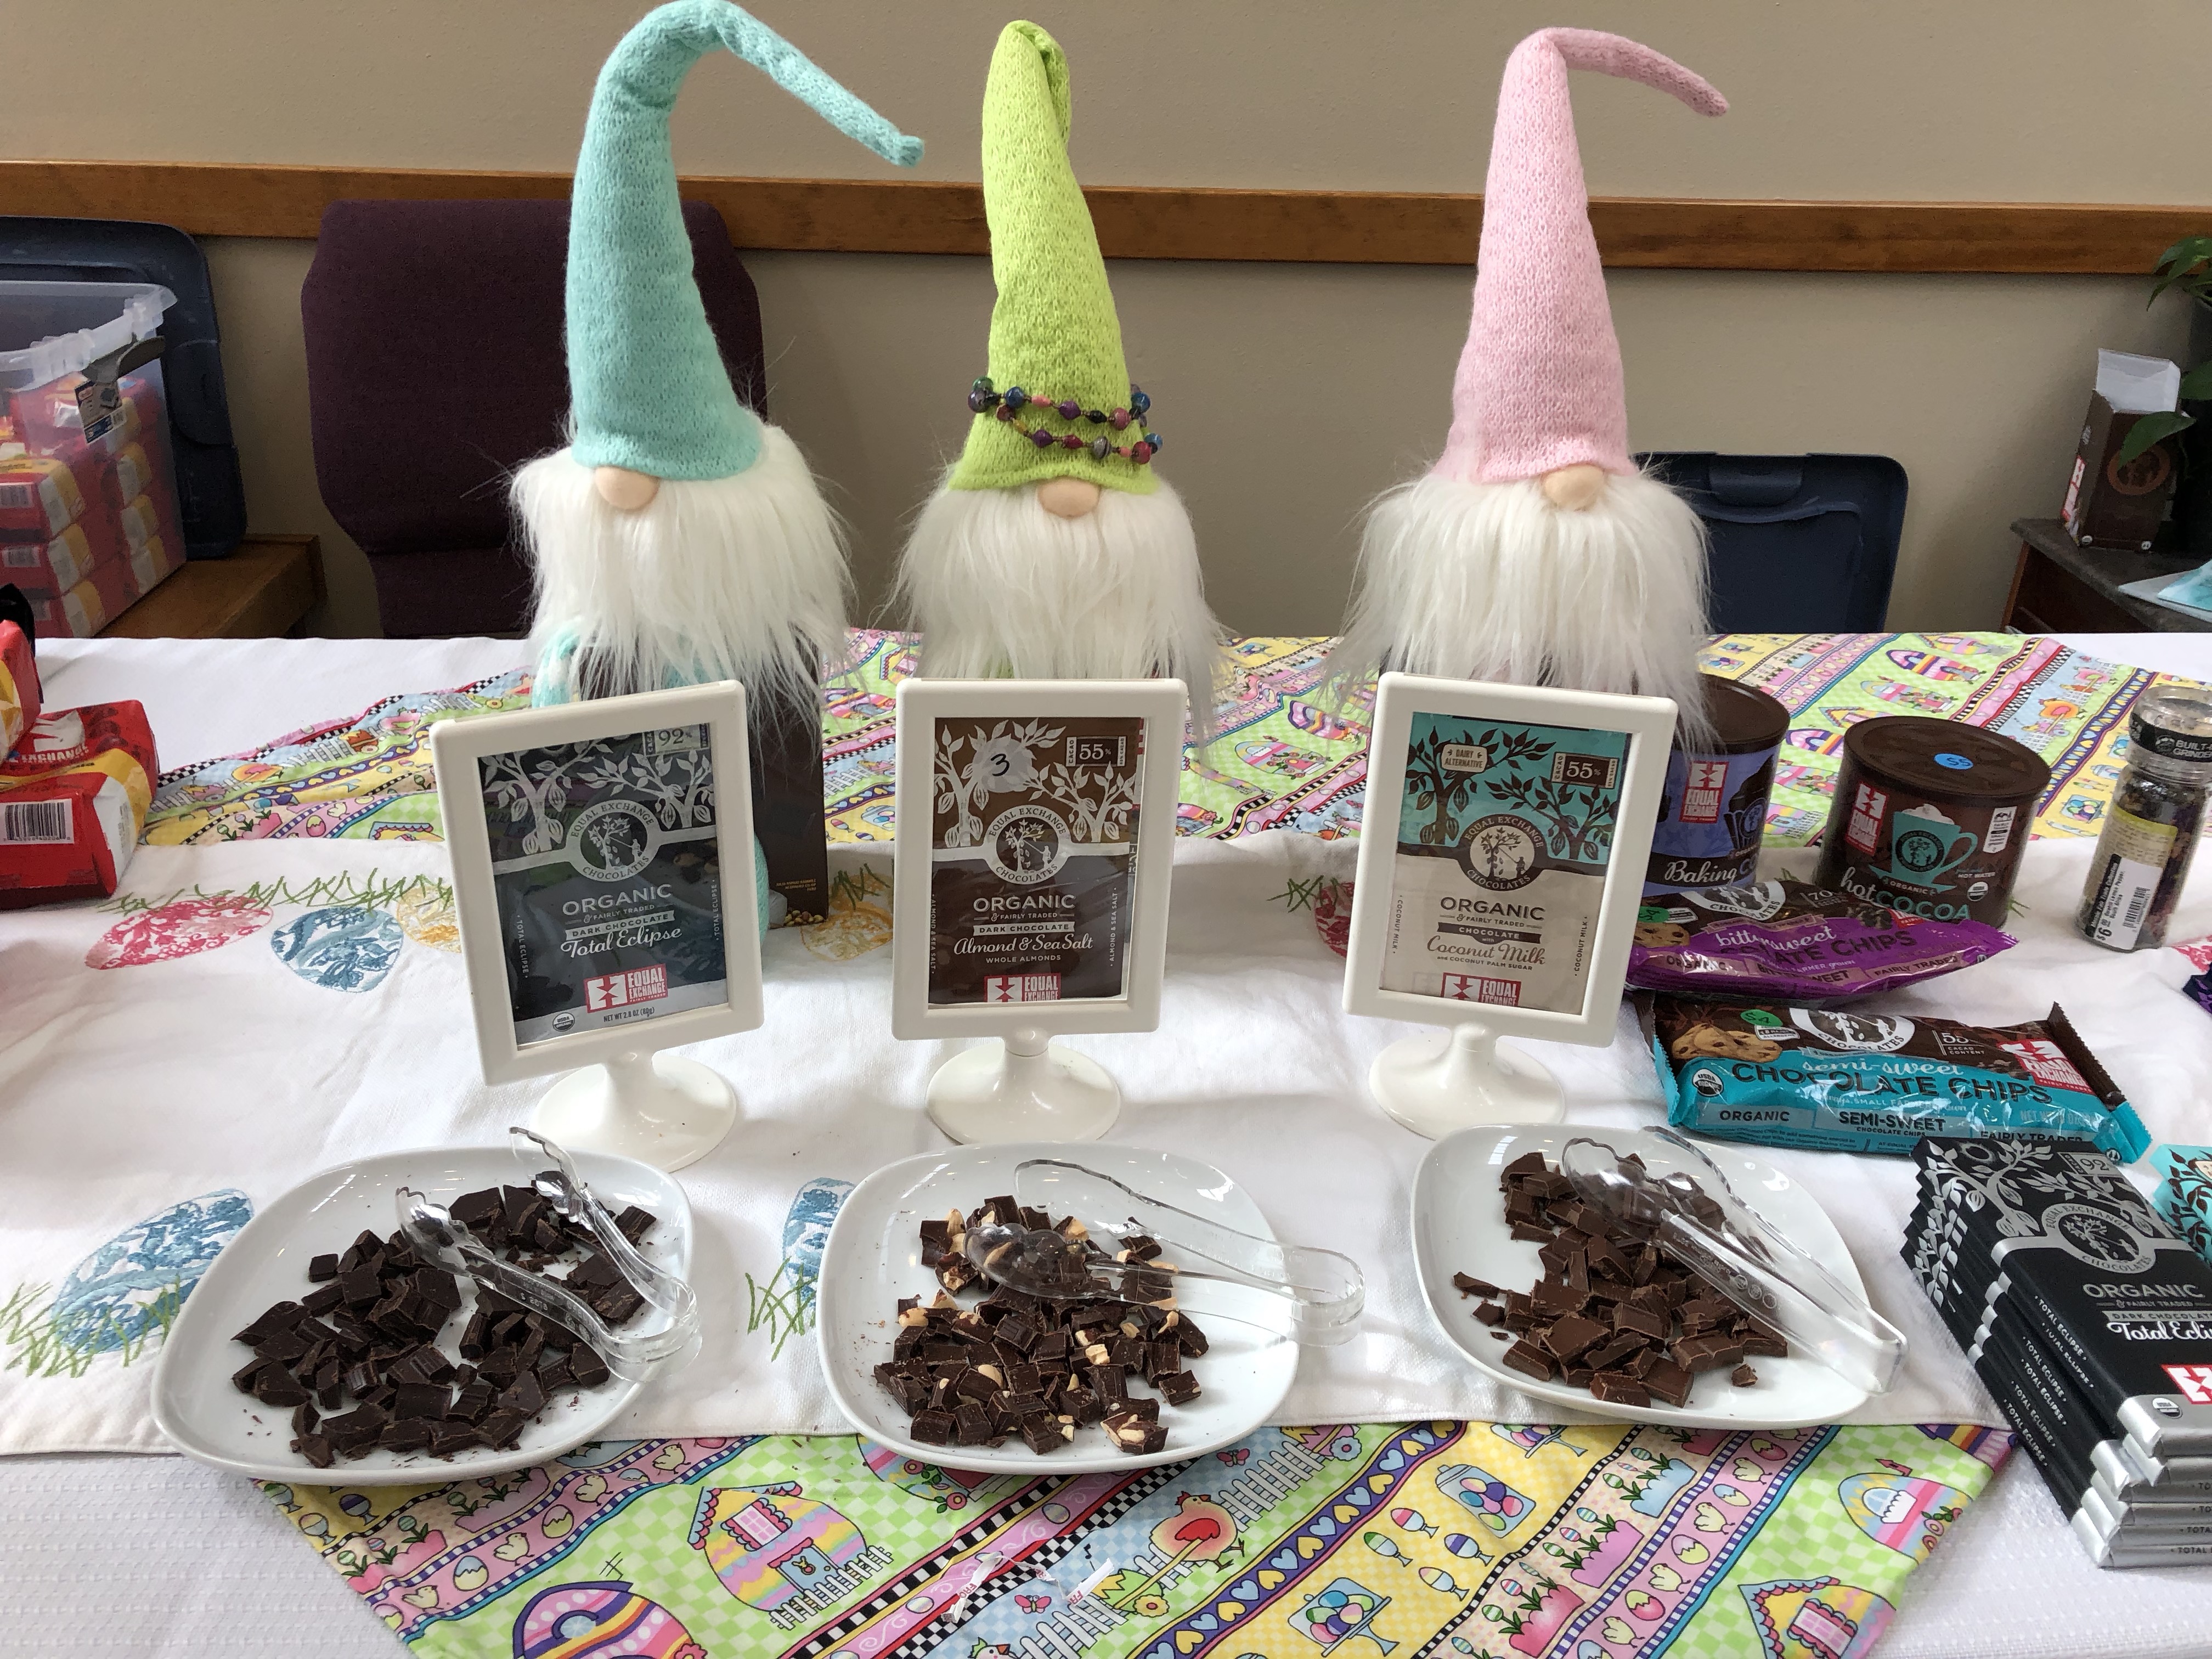 Three gnome dolls sit in front of three plates of chocolate piece samples on plates with tongs.